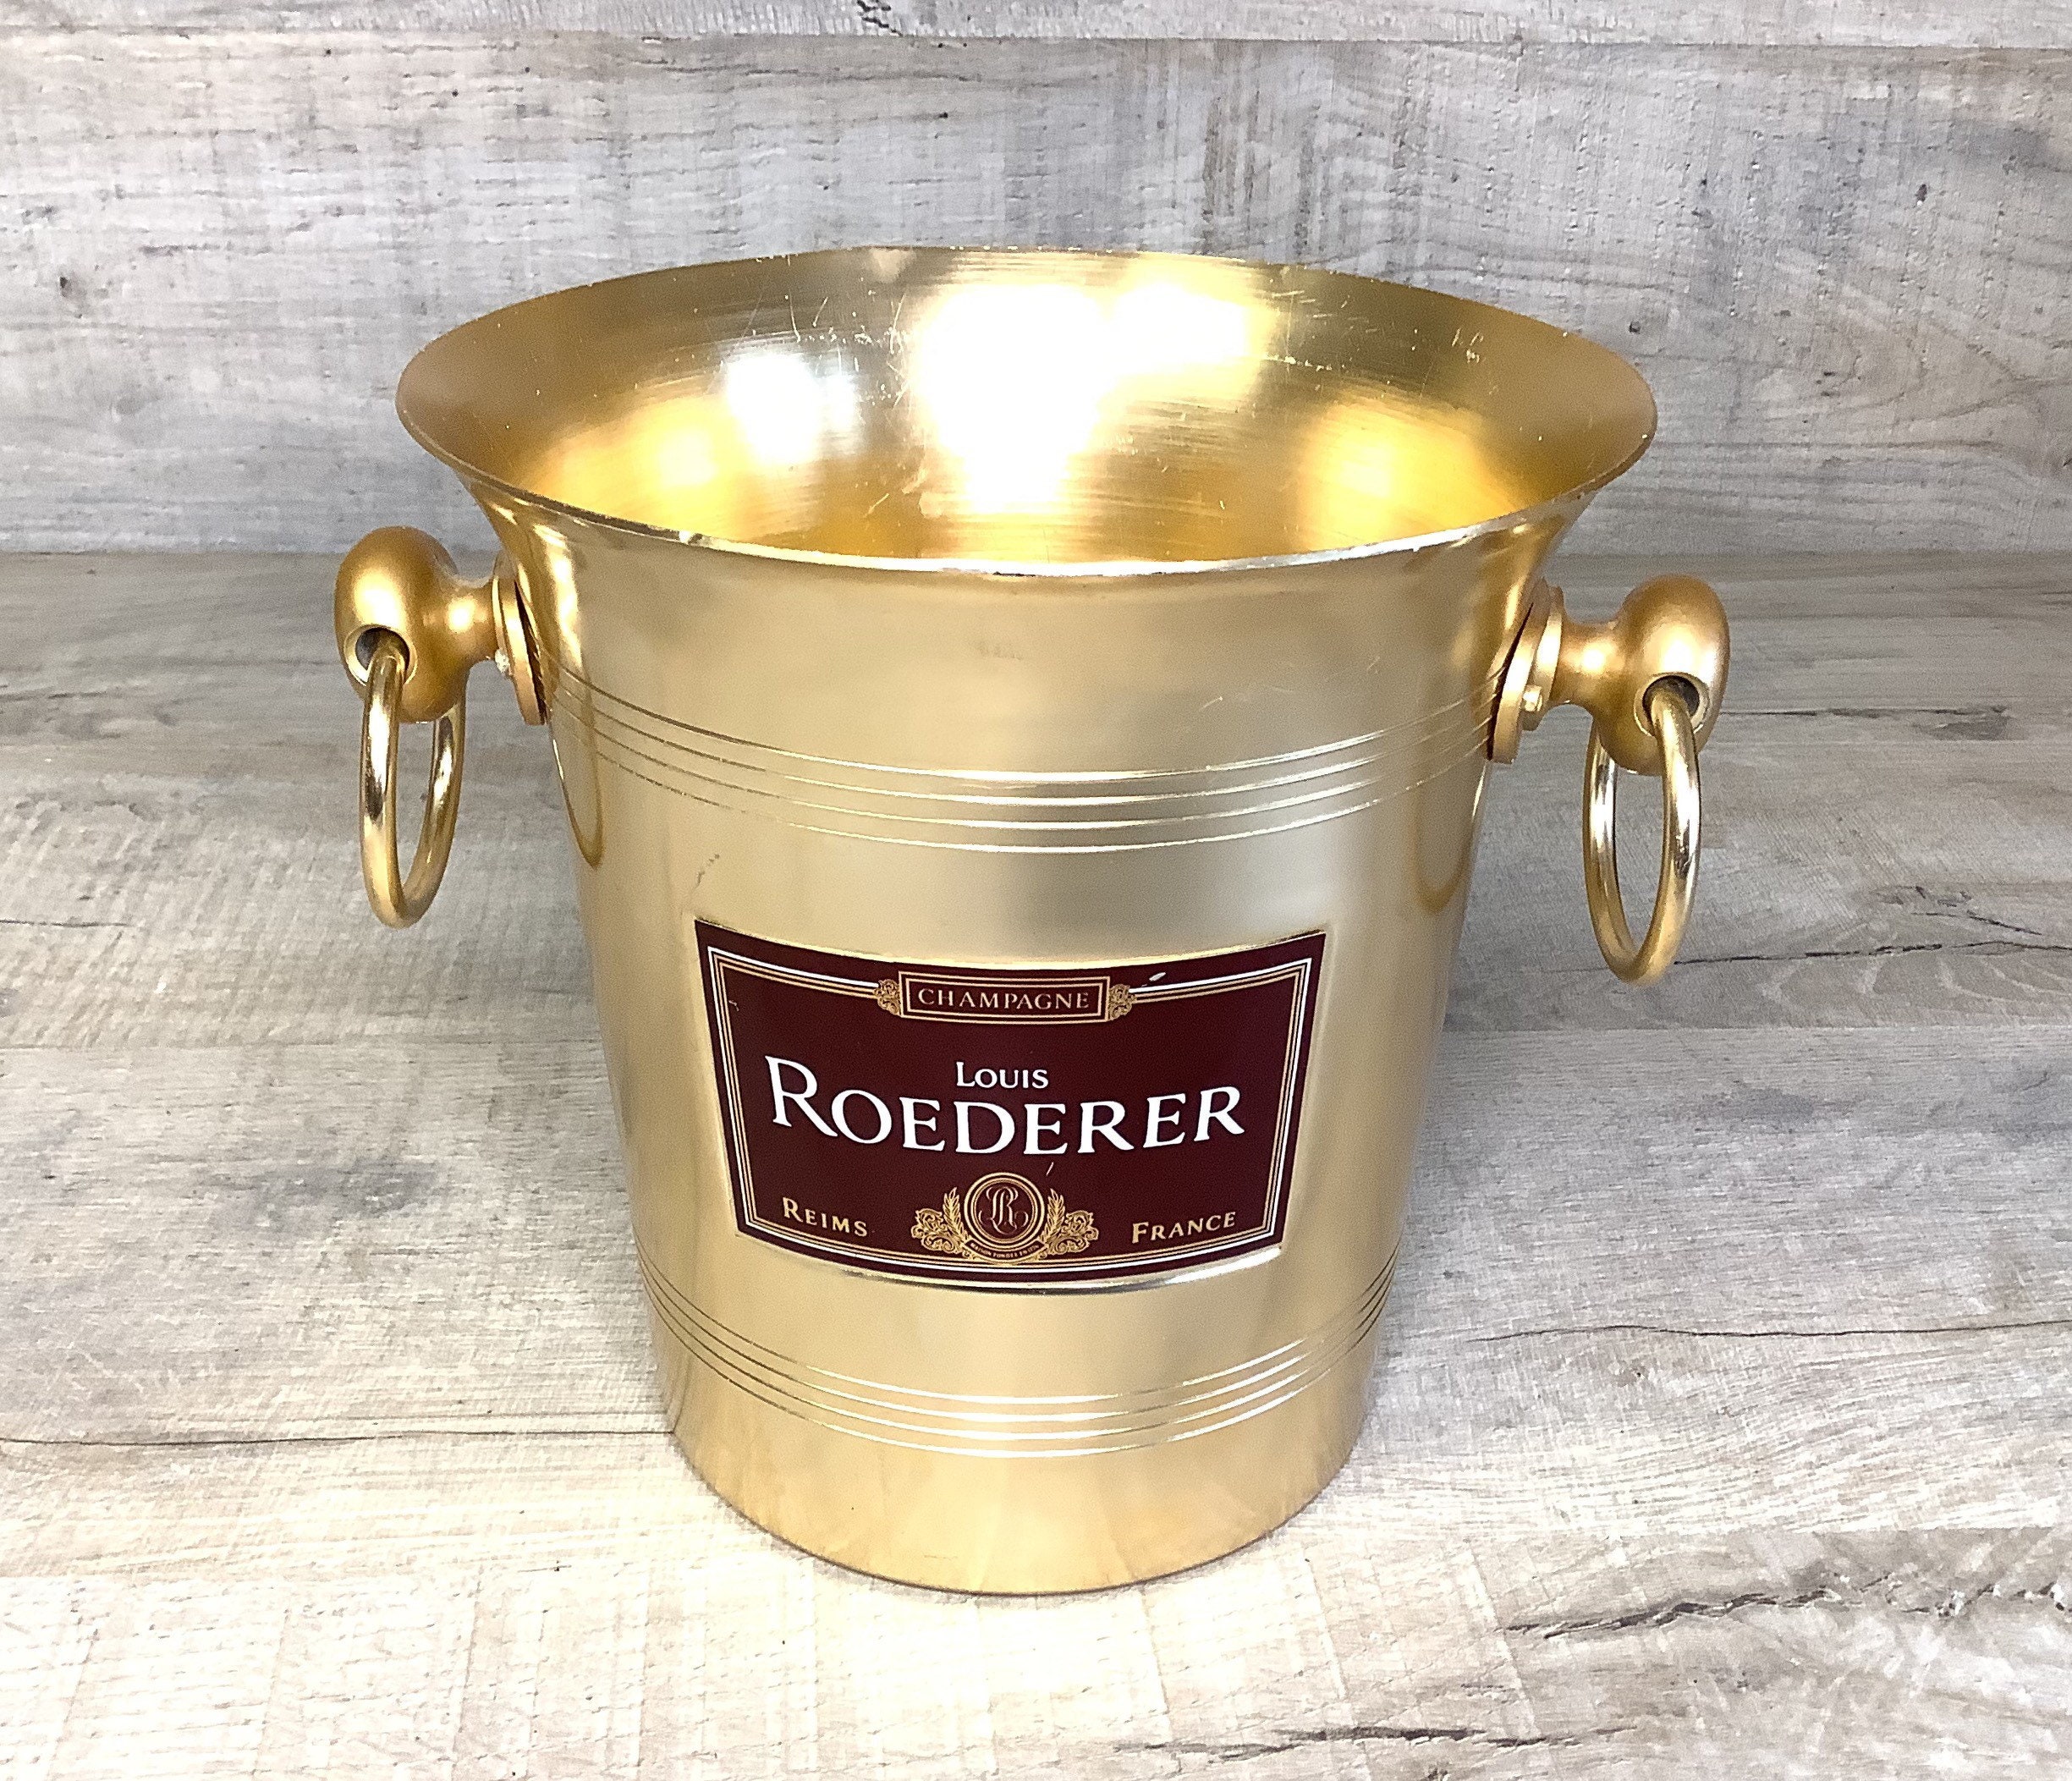 Seau à Champagne Roederer/Champagne Ice Bucket From Louis Roederer French Vintage Wine Made in Franc